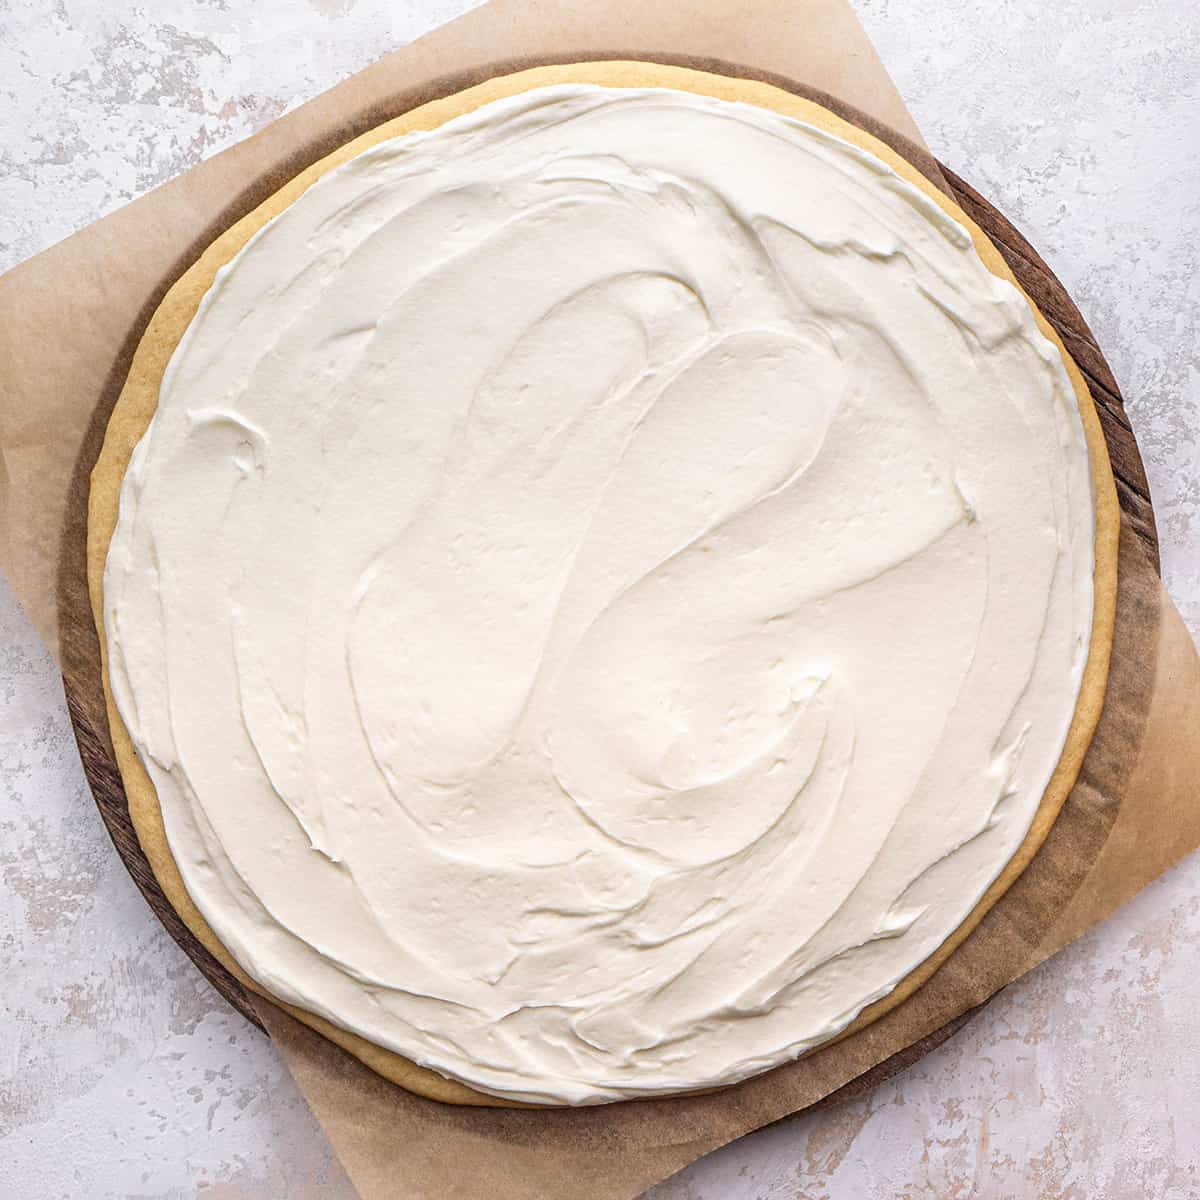 cream cheese frosting spread onto the sugar cookie crust to make fruit pizza